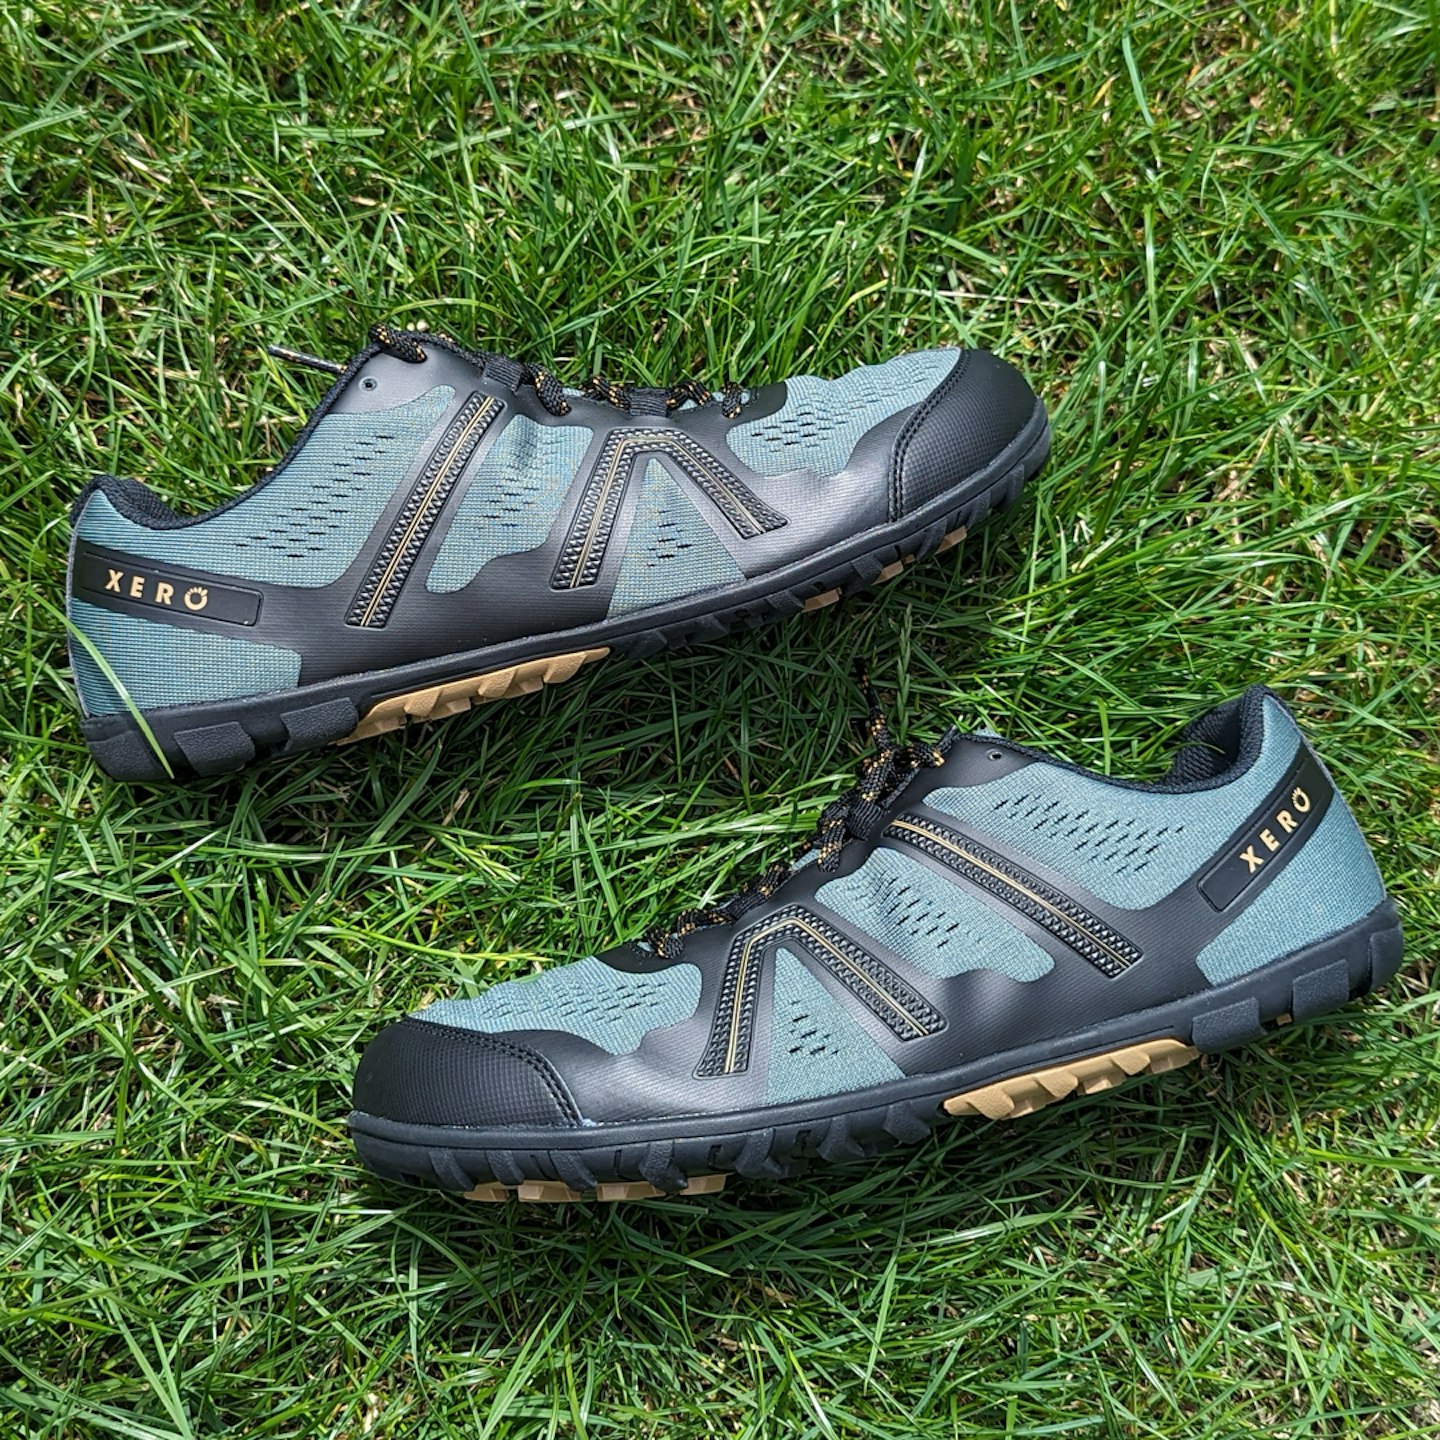 Xero Mesa trail running shoes side profile on grass